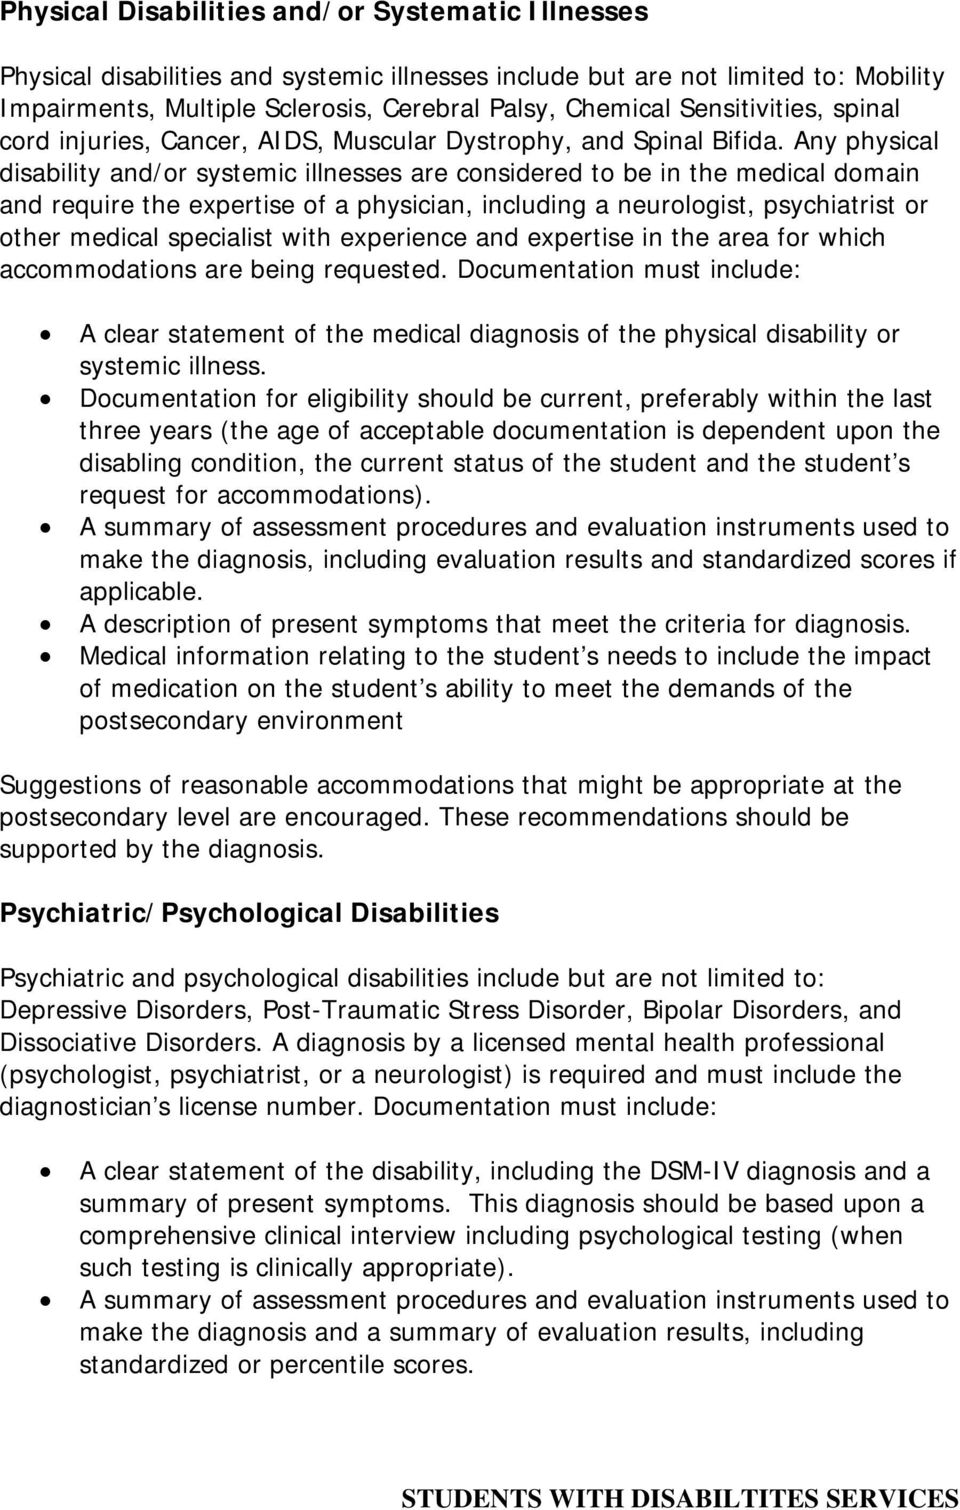 Any physical disability and/or systemic illnesses are considered to be in the medical domain and require the expertise of a physician, including a neurologist, psychiatrist or other medical